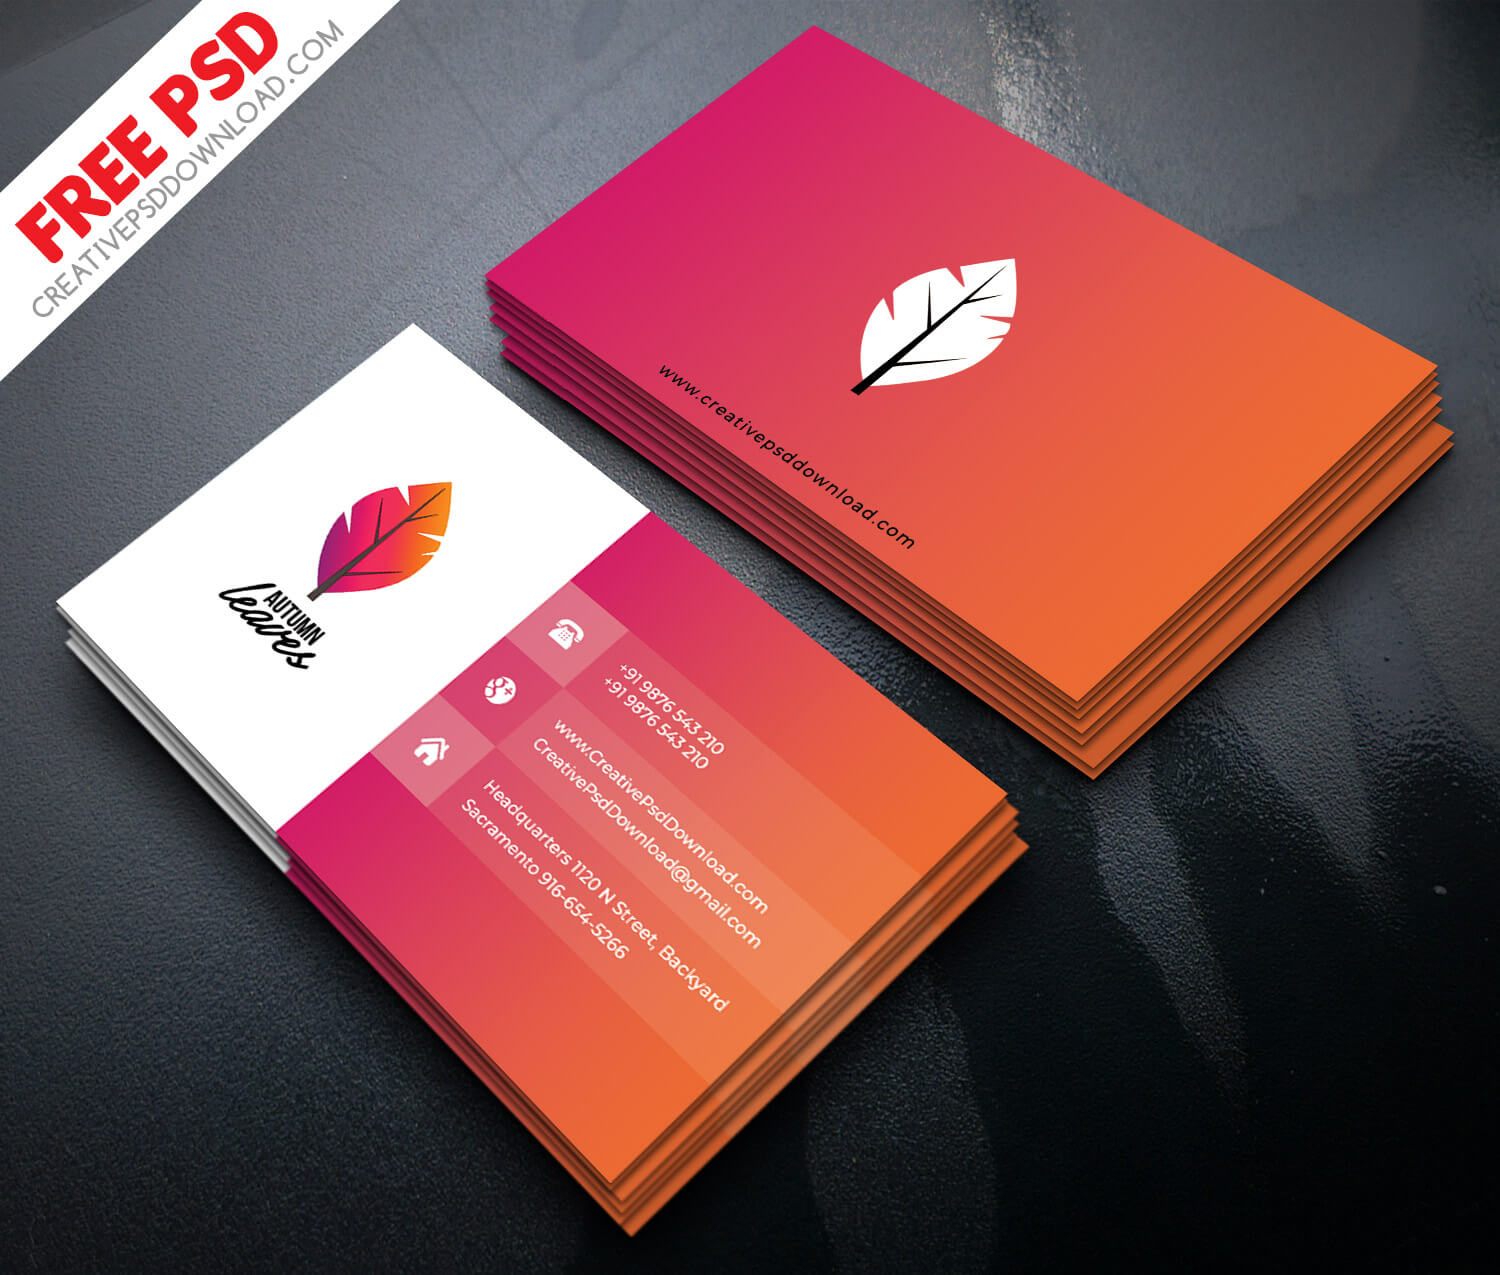 035 Blank Business Card Template Psd Download Ideas Intended For Blank 